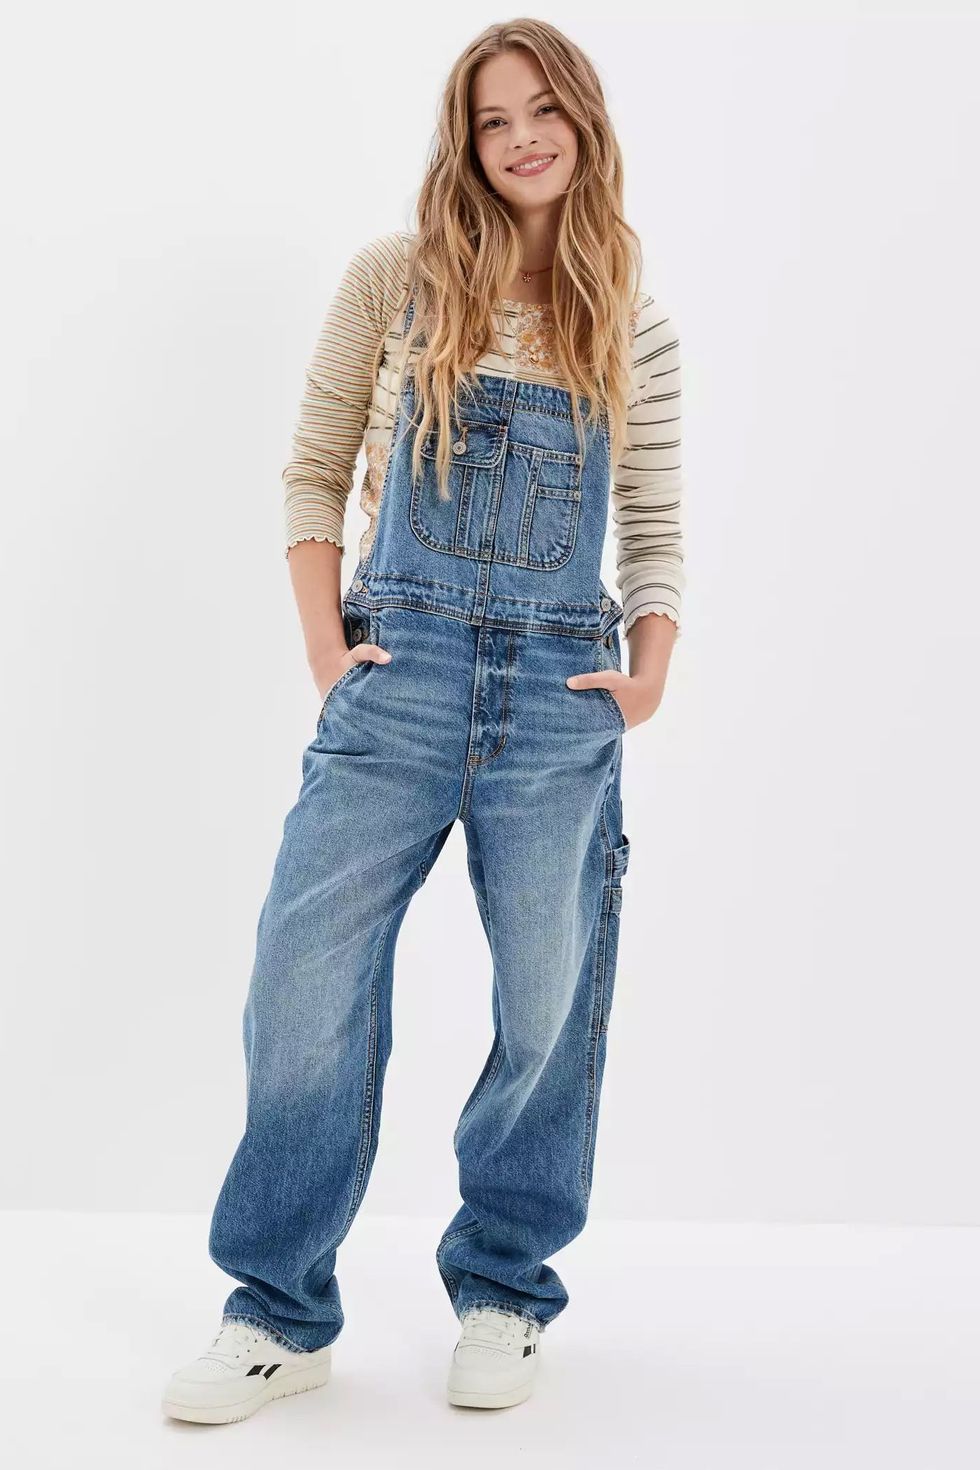 AE Denim Baggy Overall